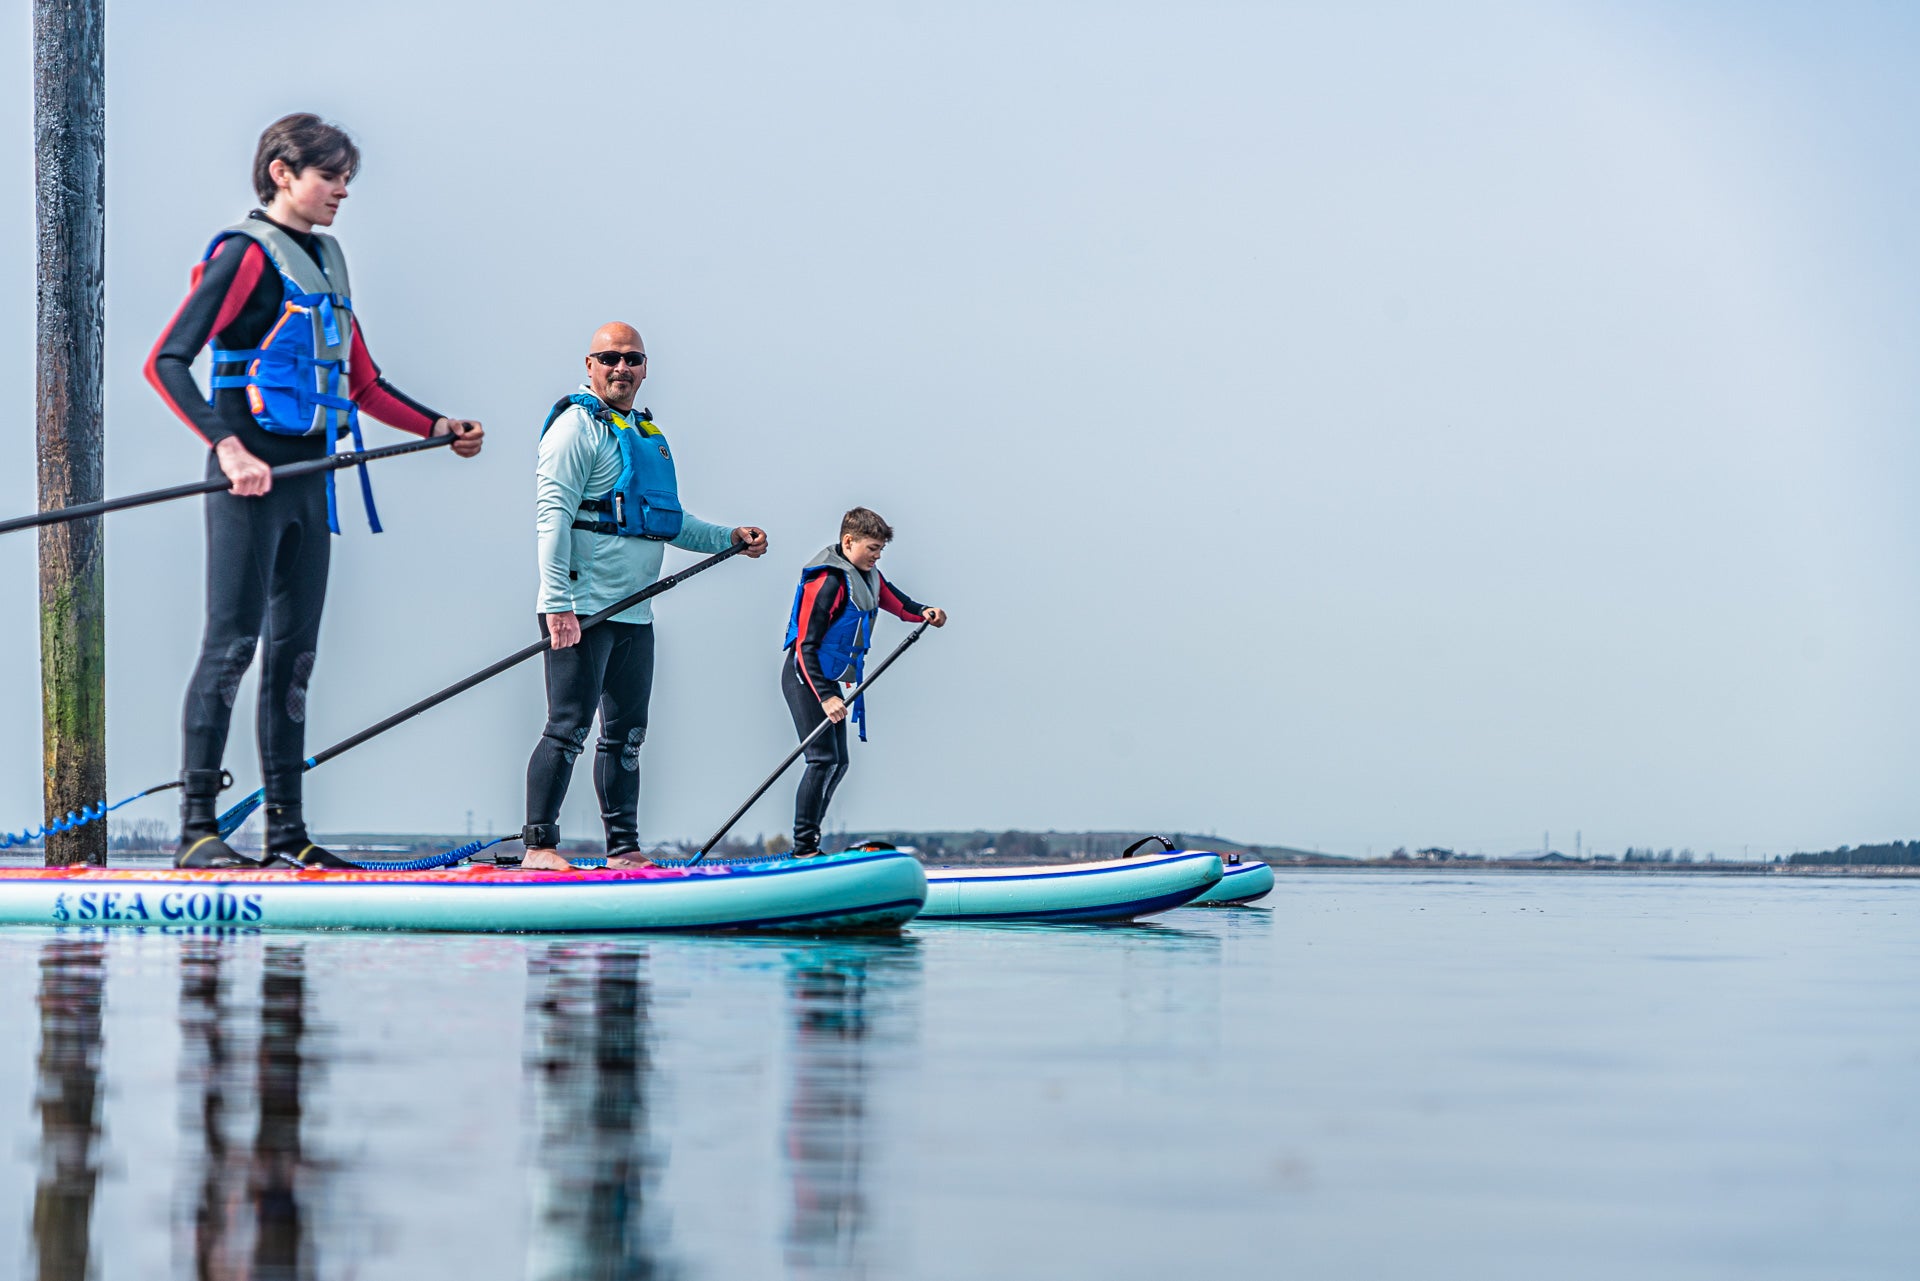 stand up paddle boarding for seniors - social outing with grandkids